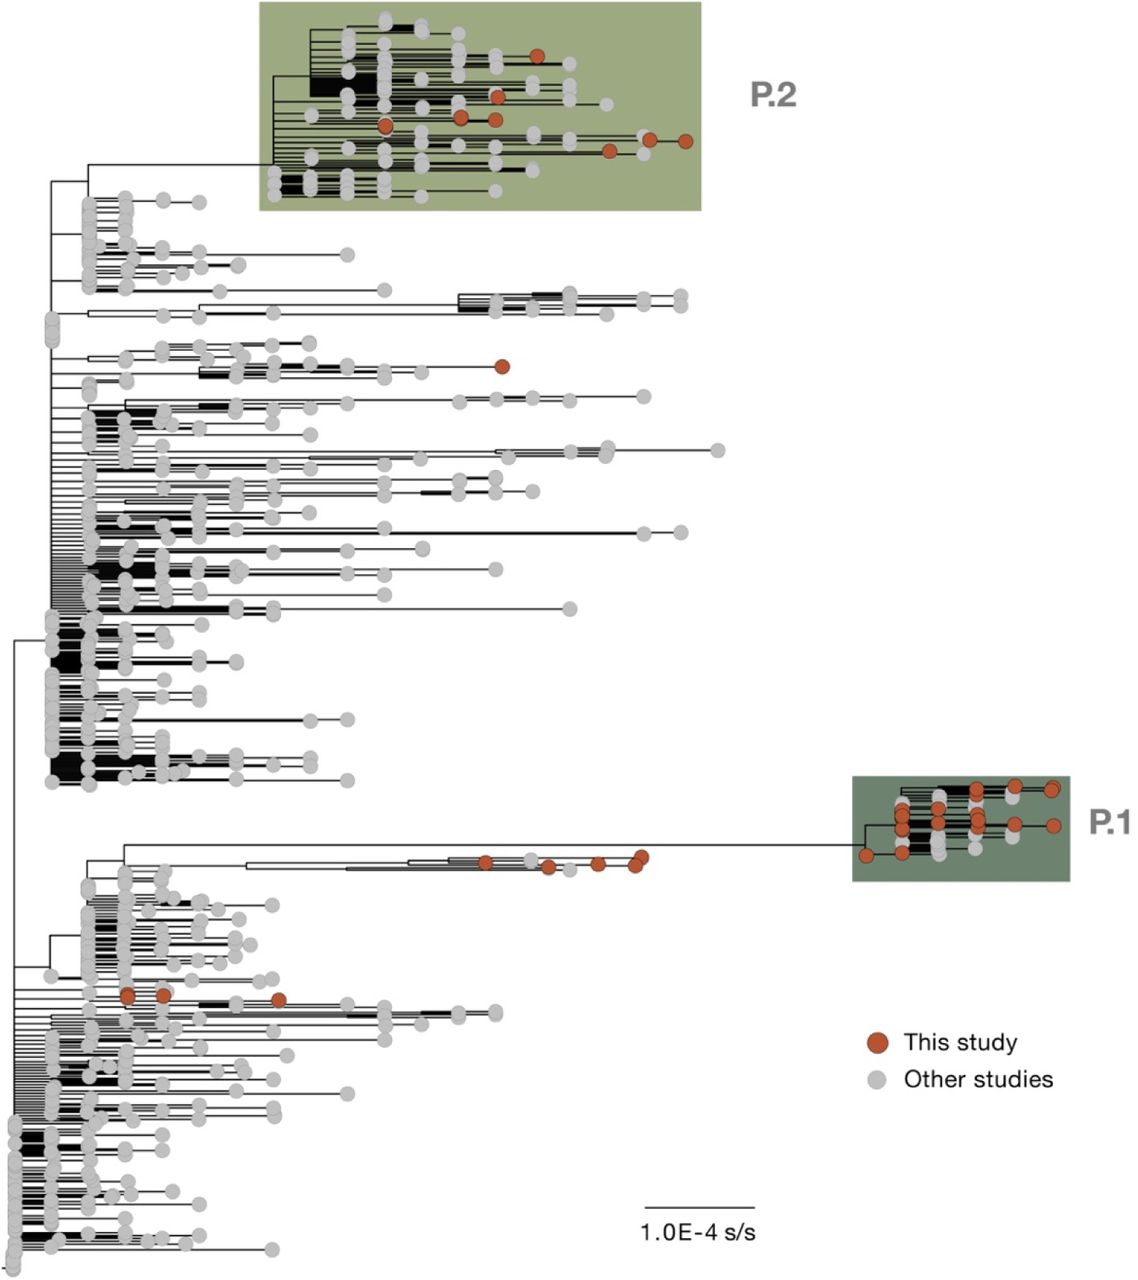 Genomics And Epidemiology Of A Novel Sars Cov 2 Lineage In Manaus Brazil Medrxiv